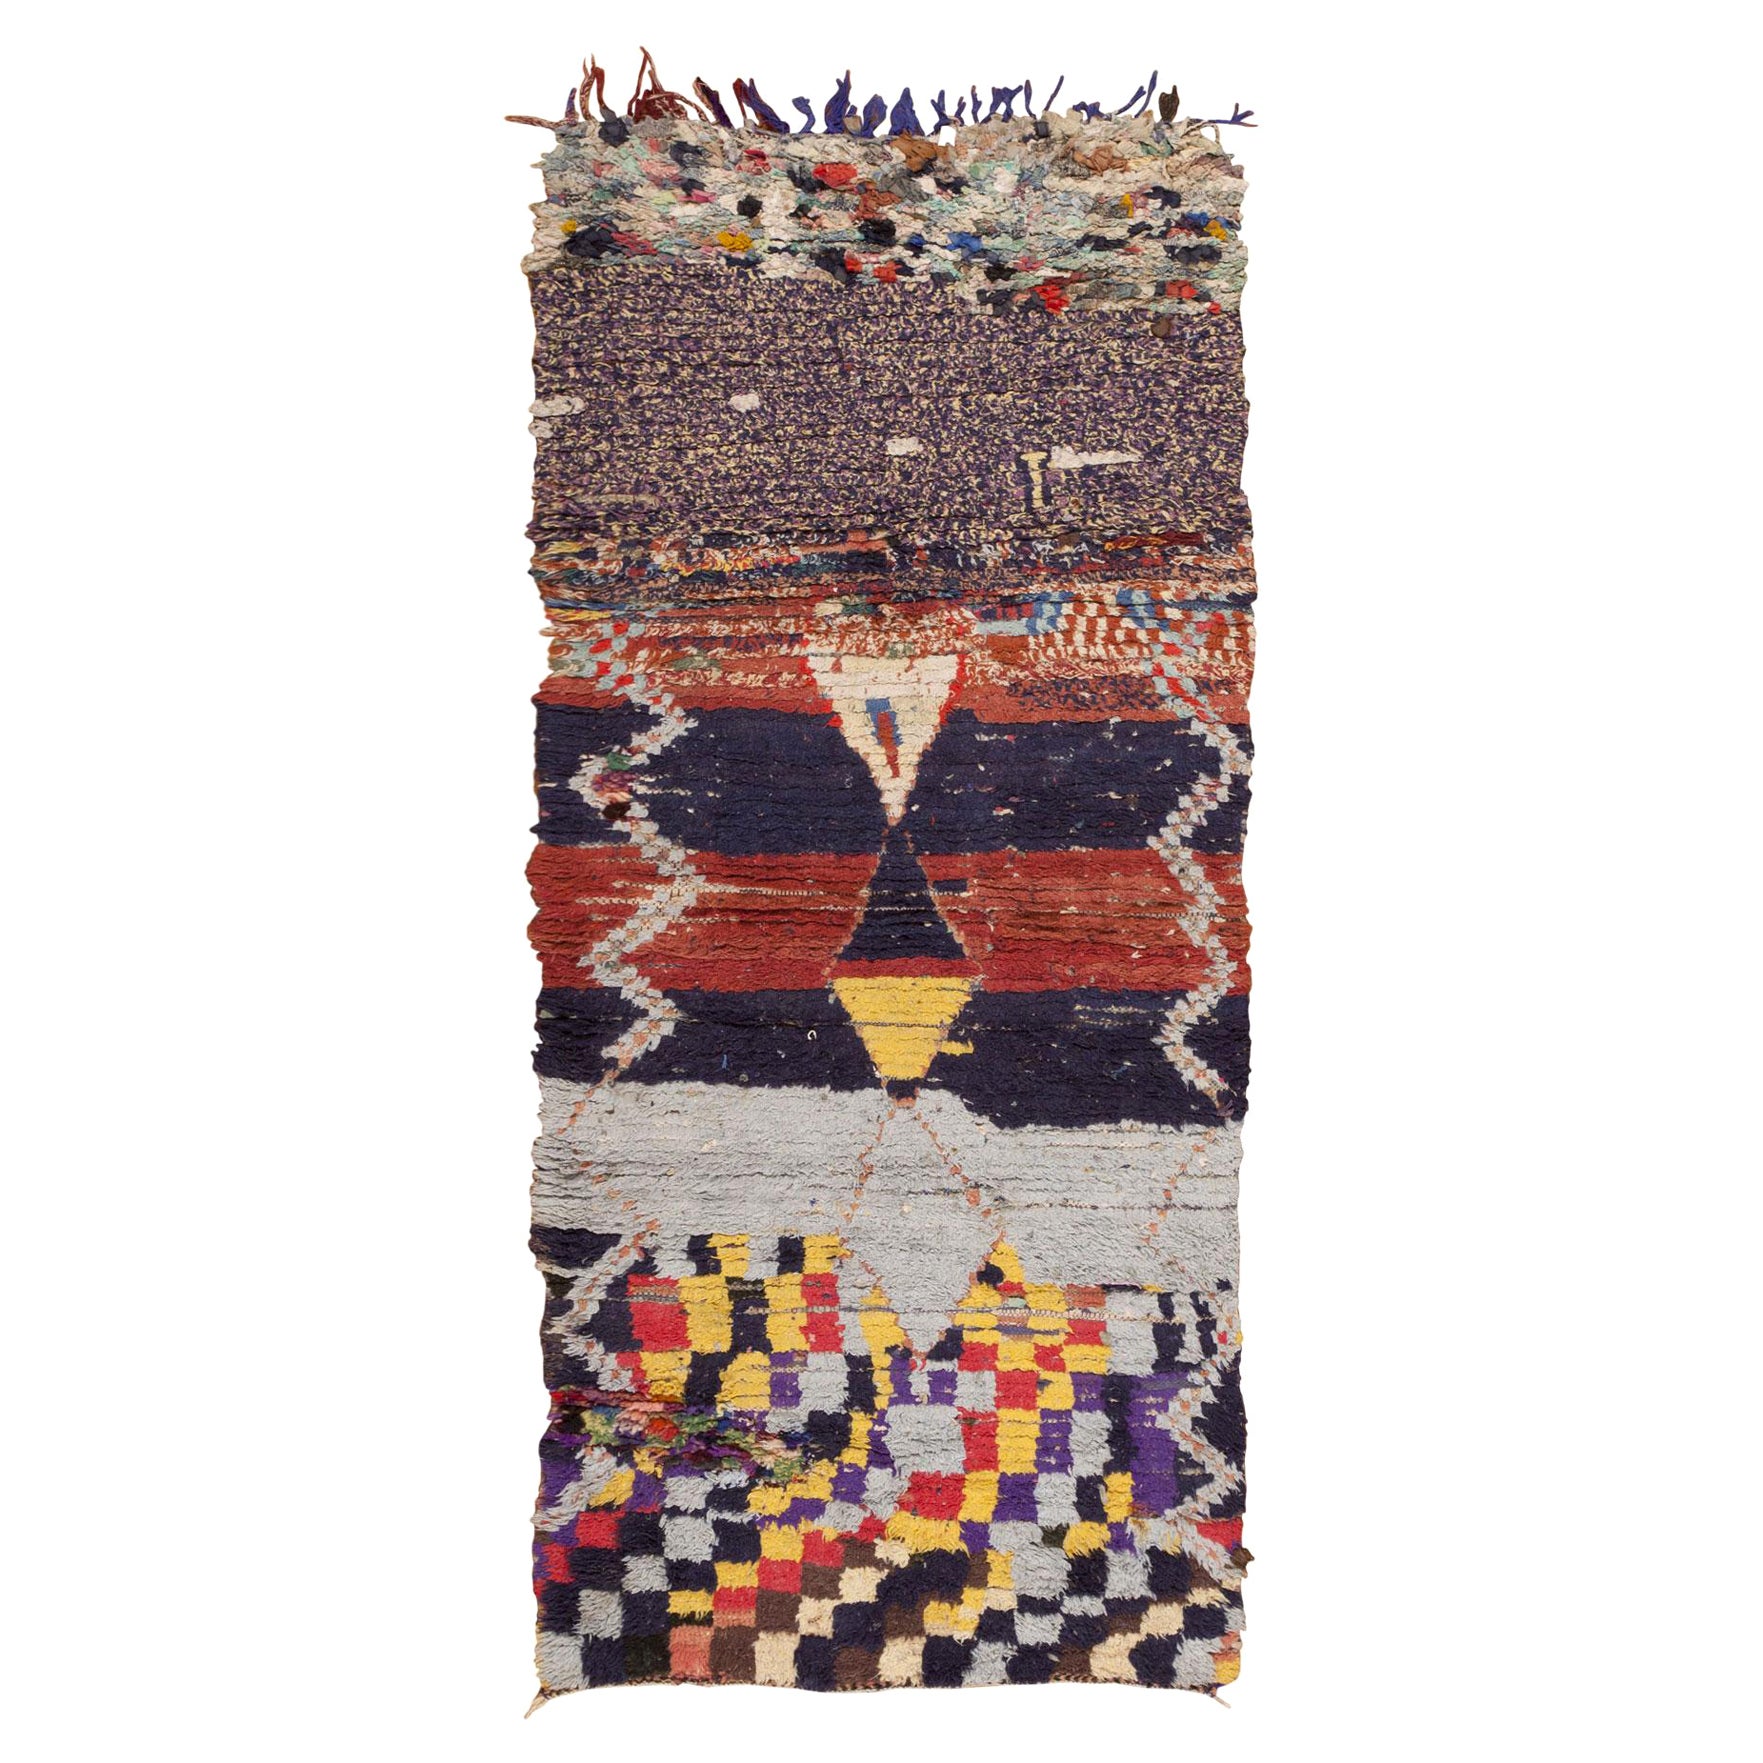 Moroccan Rug. Size: 3 ft x 6 ft 6 in (0.91 m x 1.98 m)